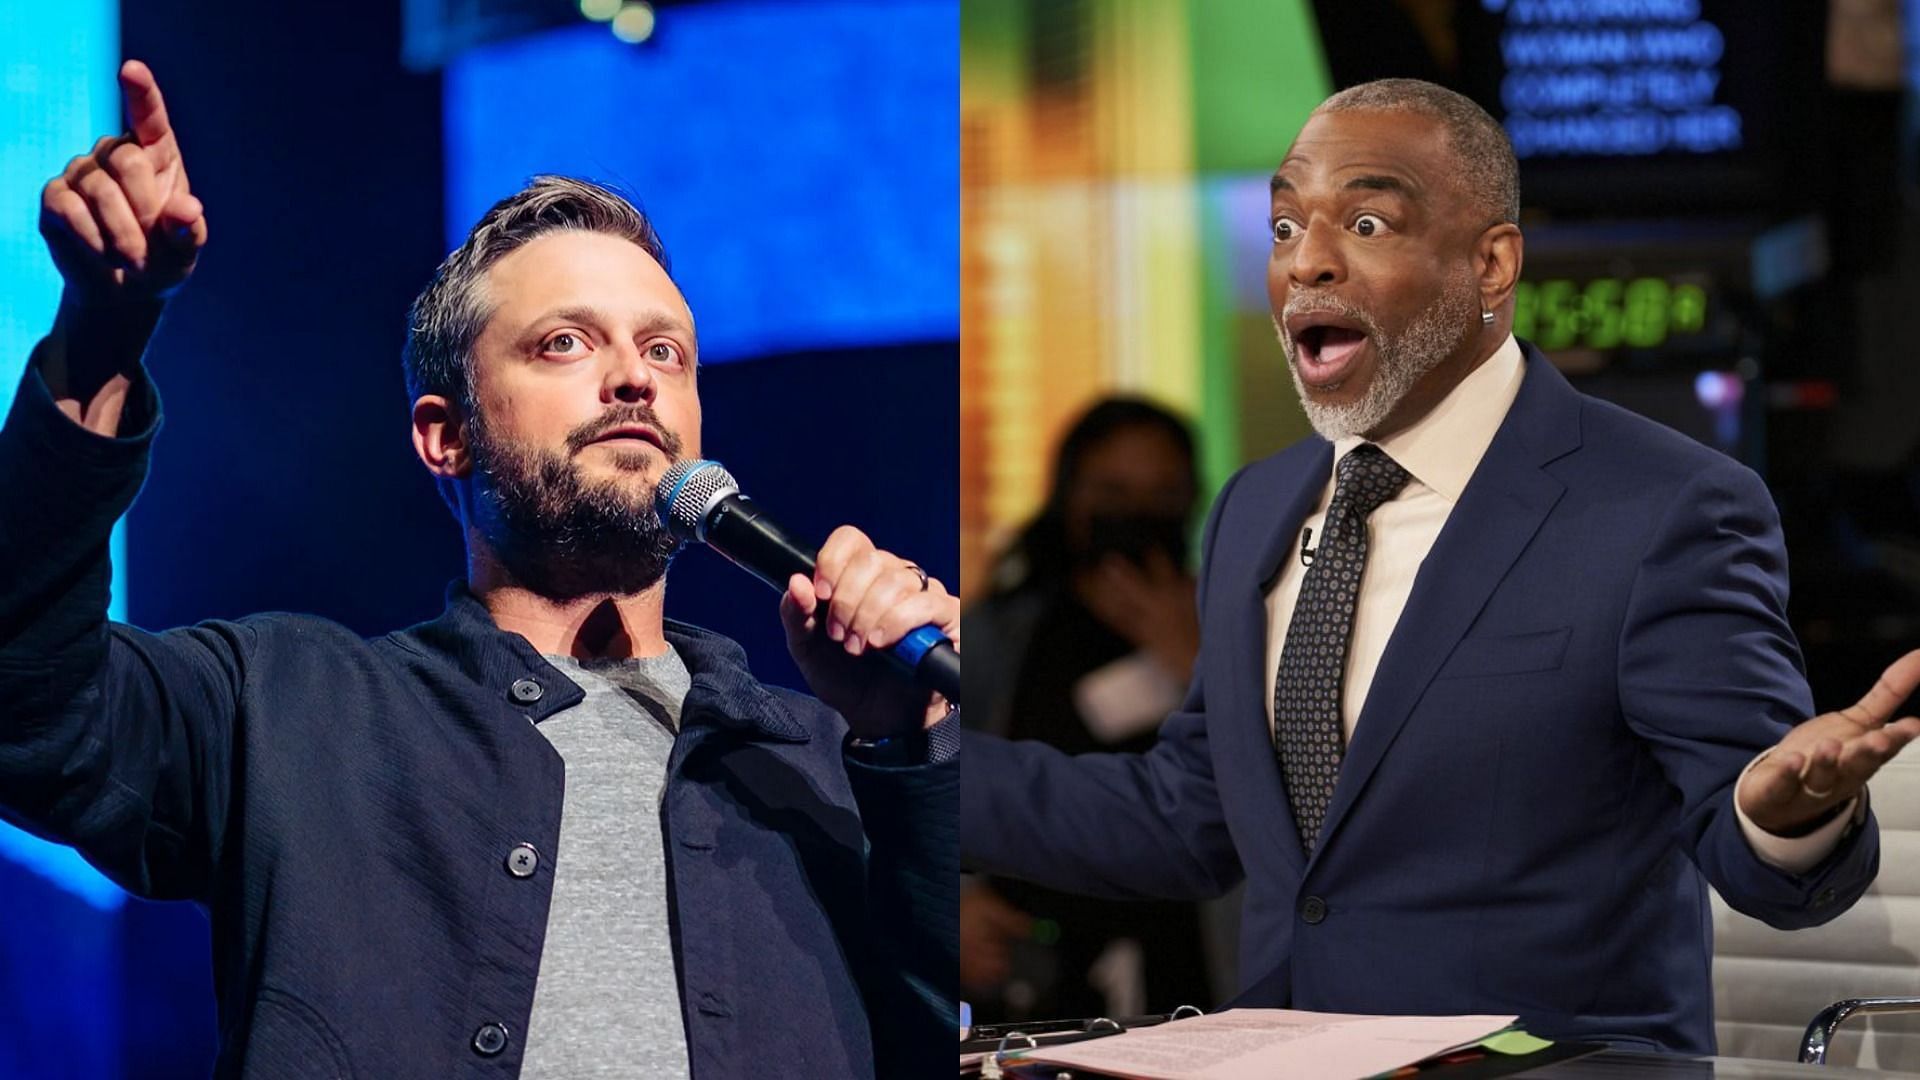 LeVar Burton and Nate Bargatze took a dig at Will Smith by referring to the Oscars incident where he slapped Chris Rock (Image via Getty Images/Kyle Rivas/Clifton Prescod)